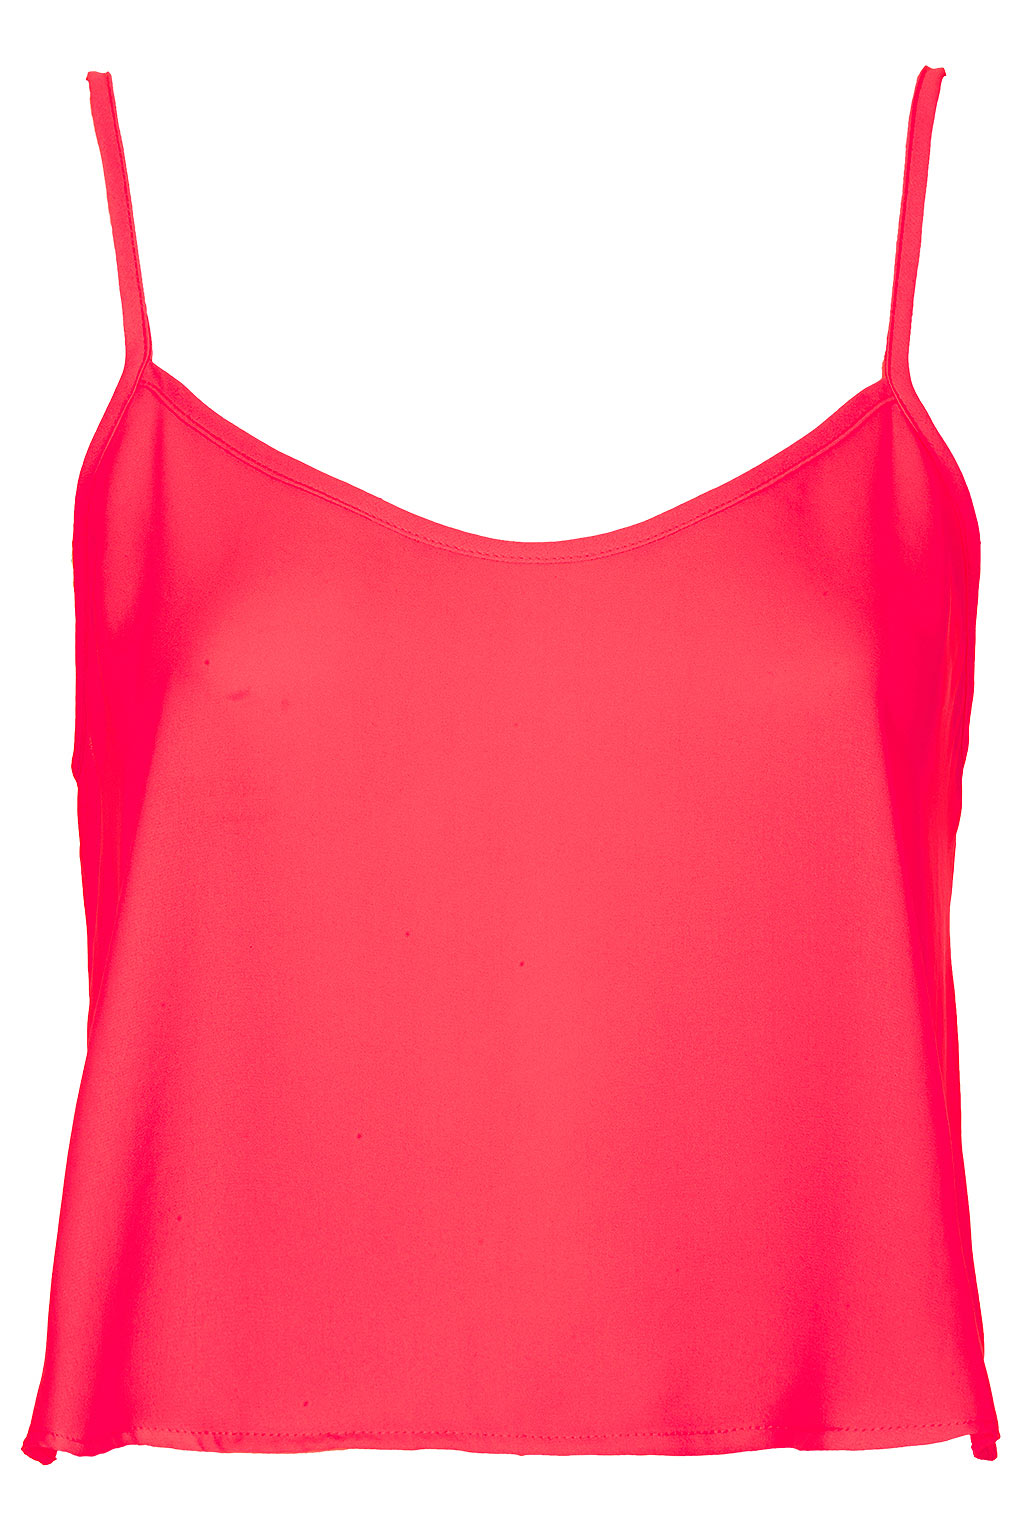 Topshop Cropped Soft Cami in Pink | Lyst